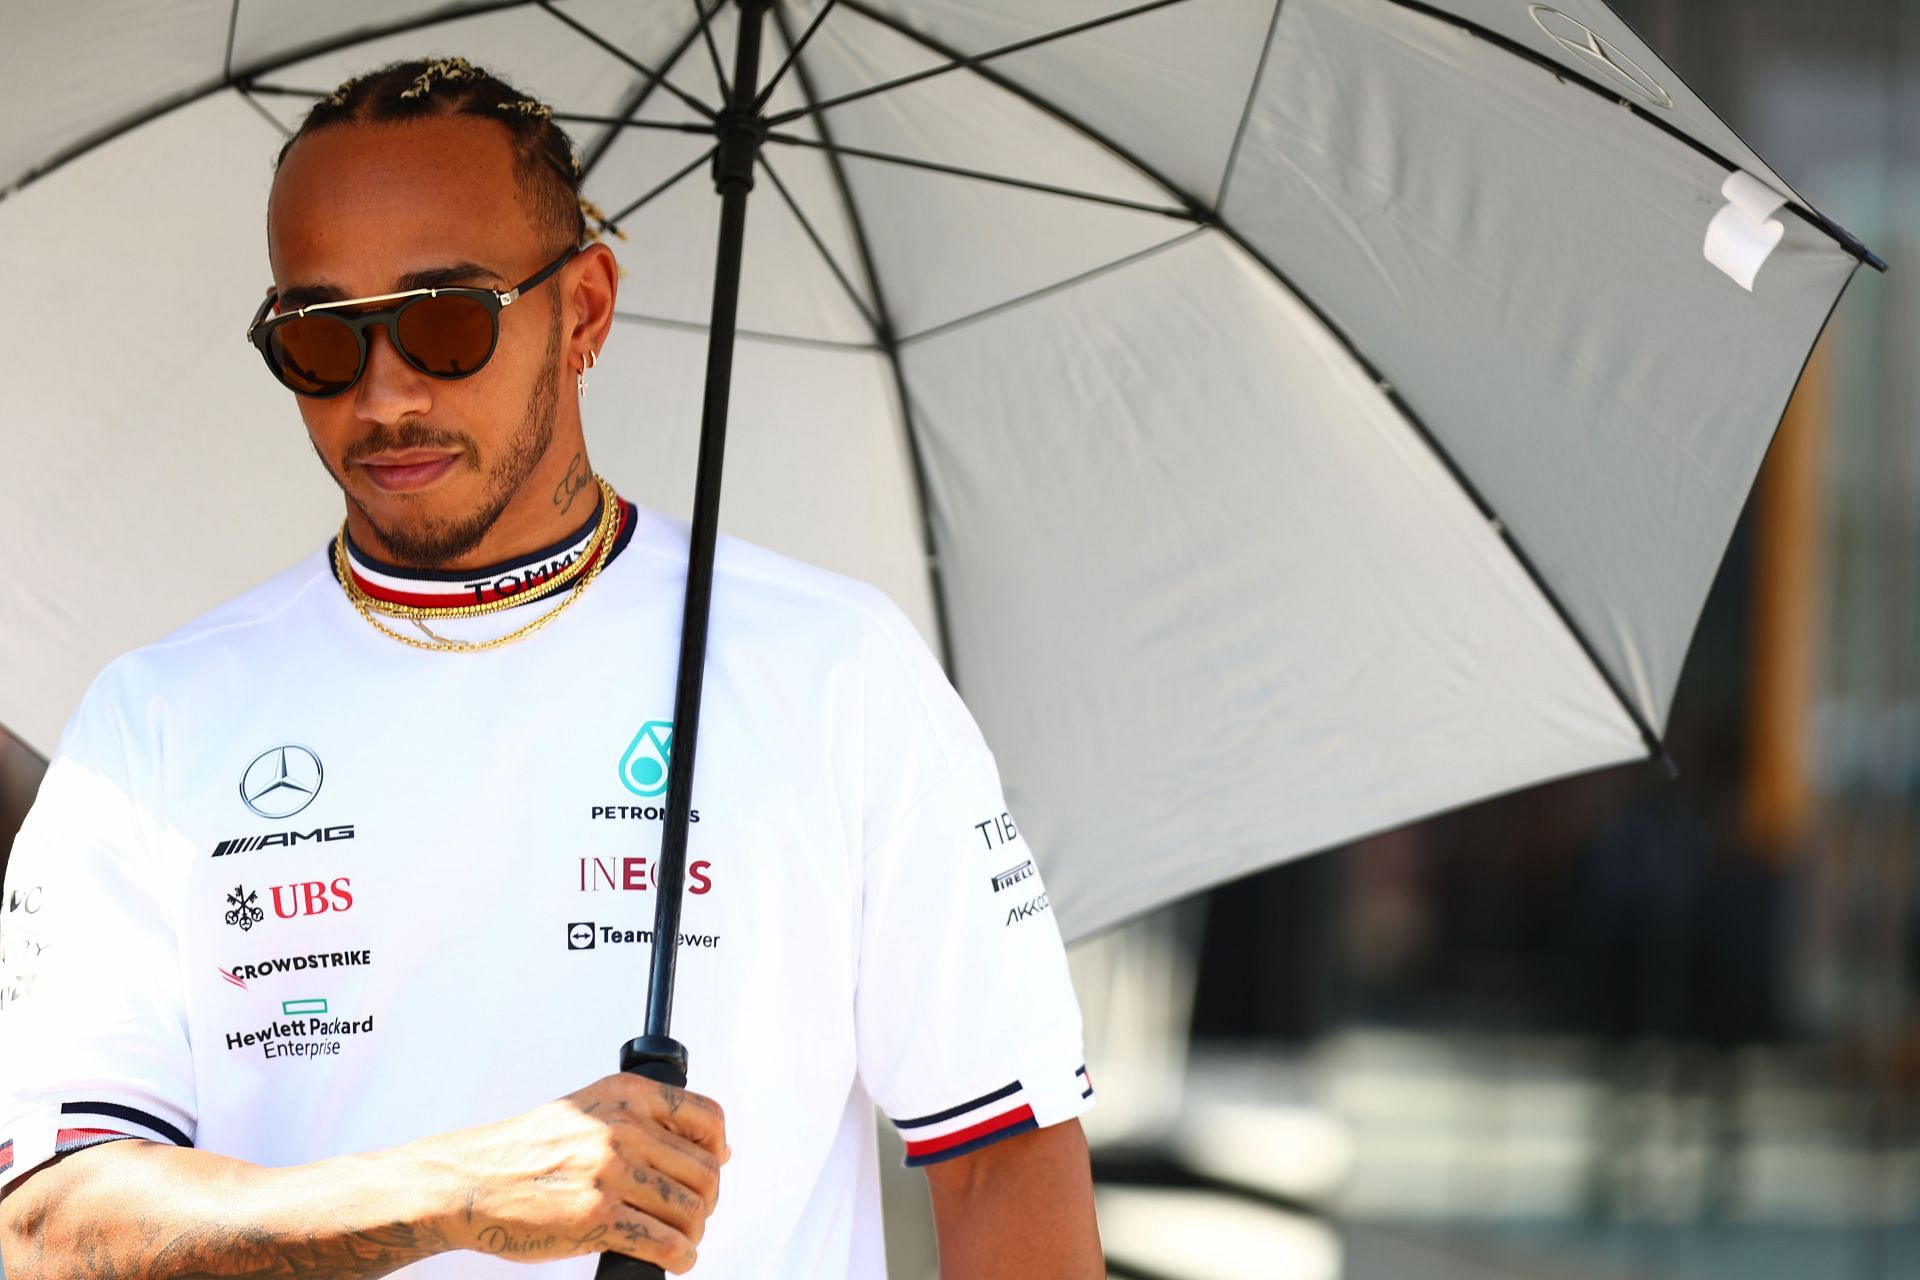 Jean Alesi feels that Lewis Hamilton driving in an uncompetitive car is embarassing